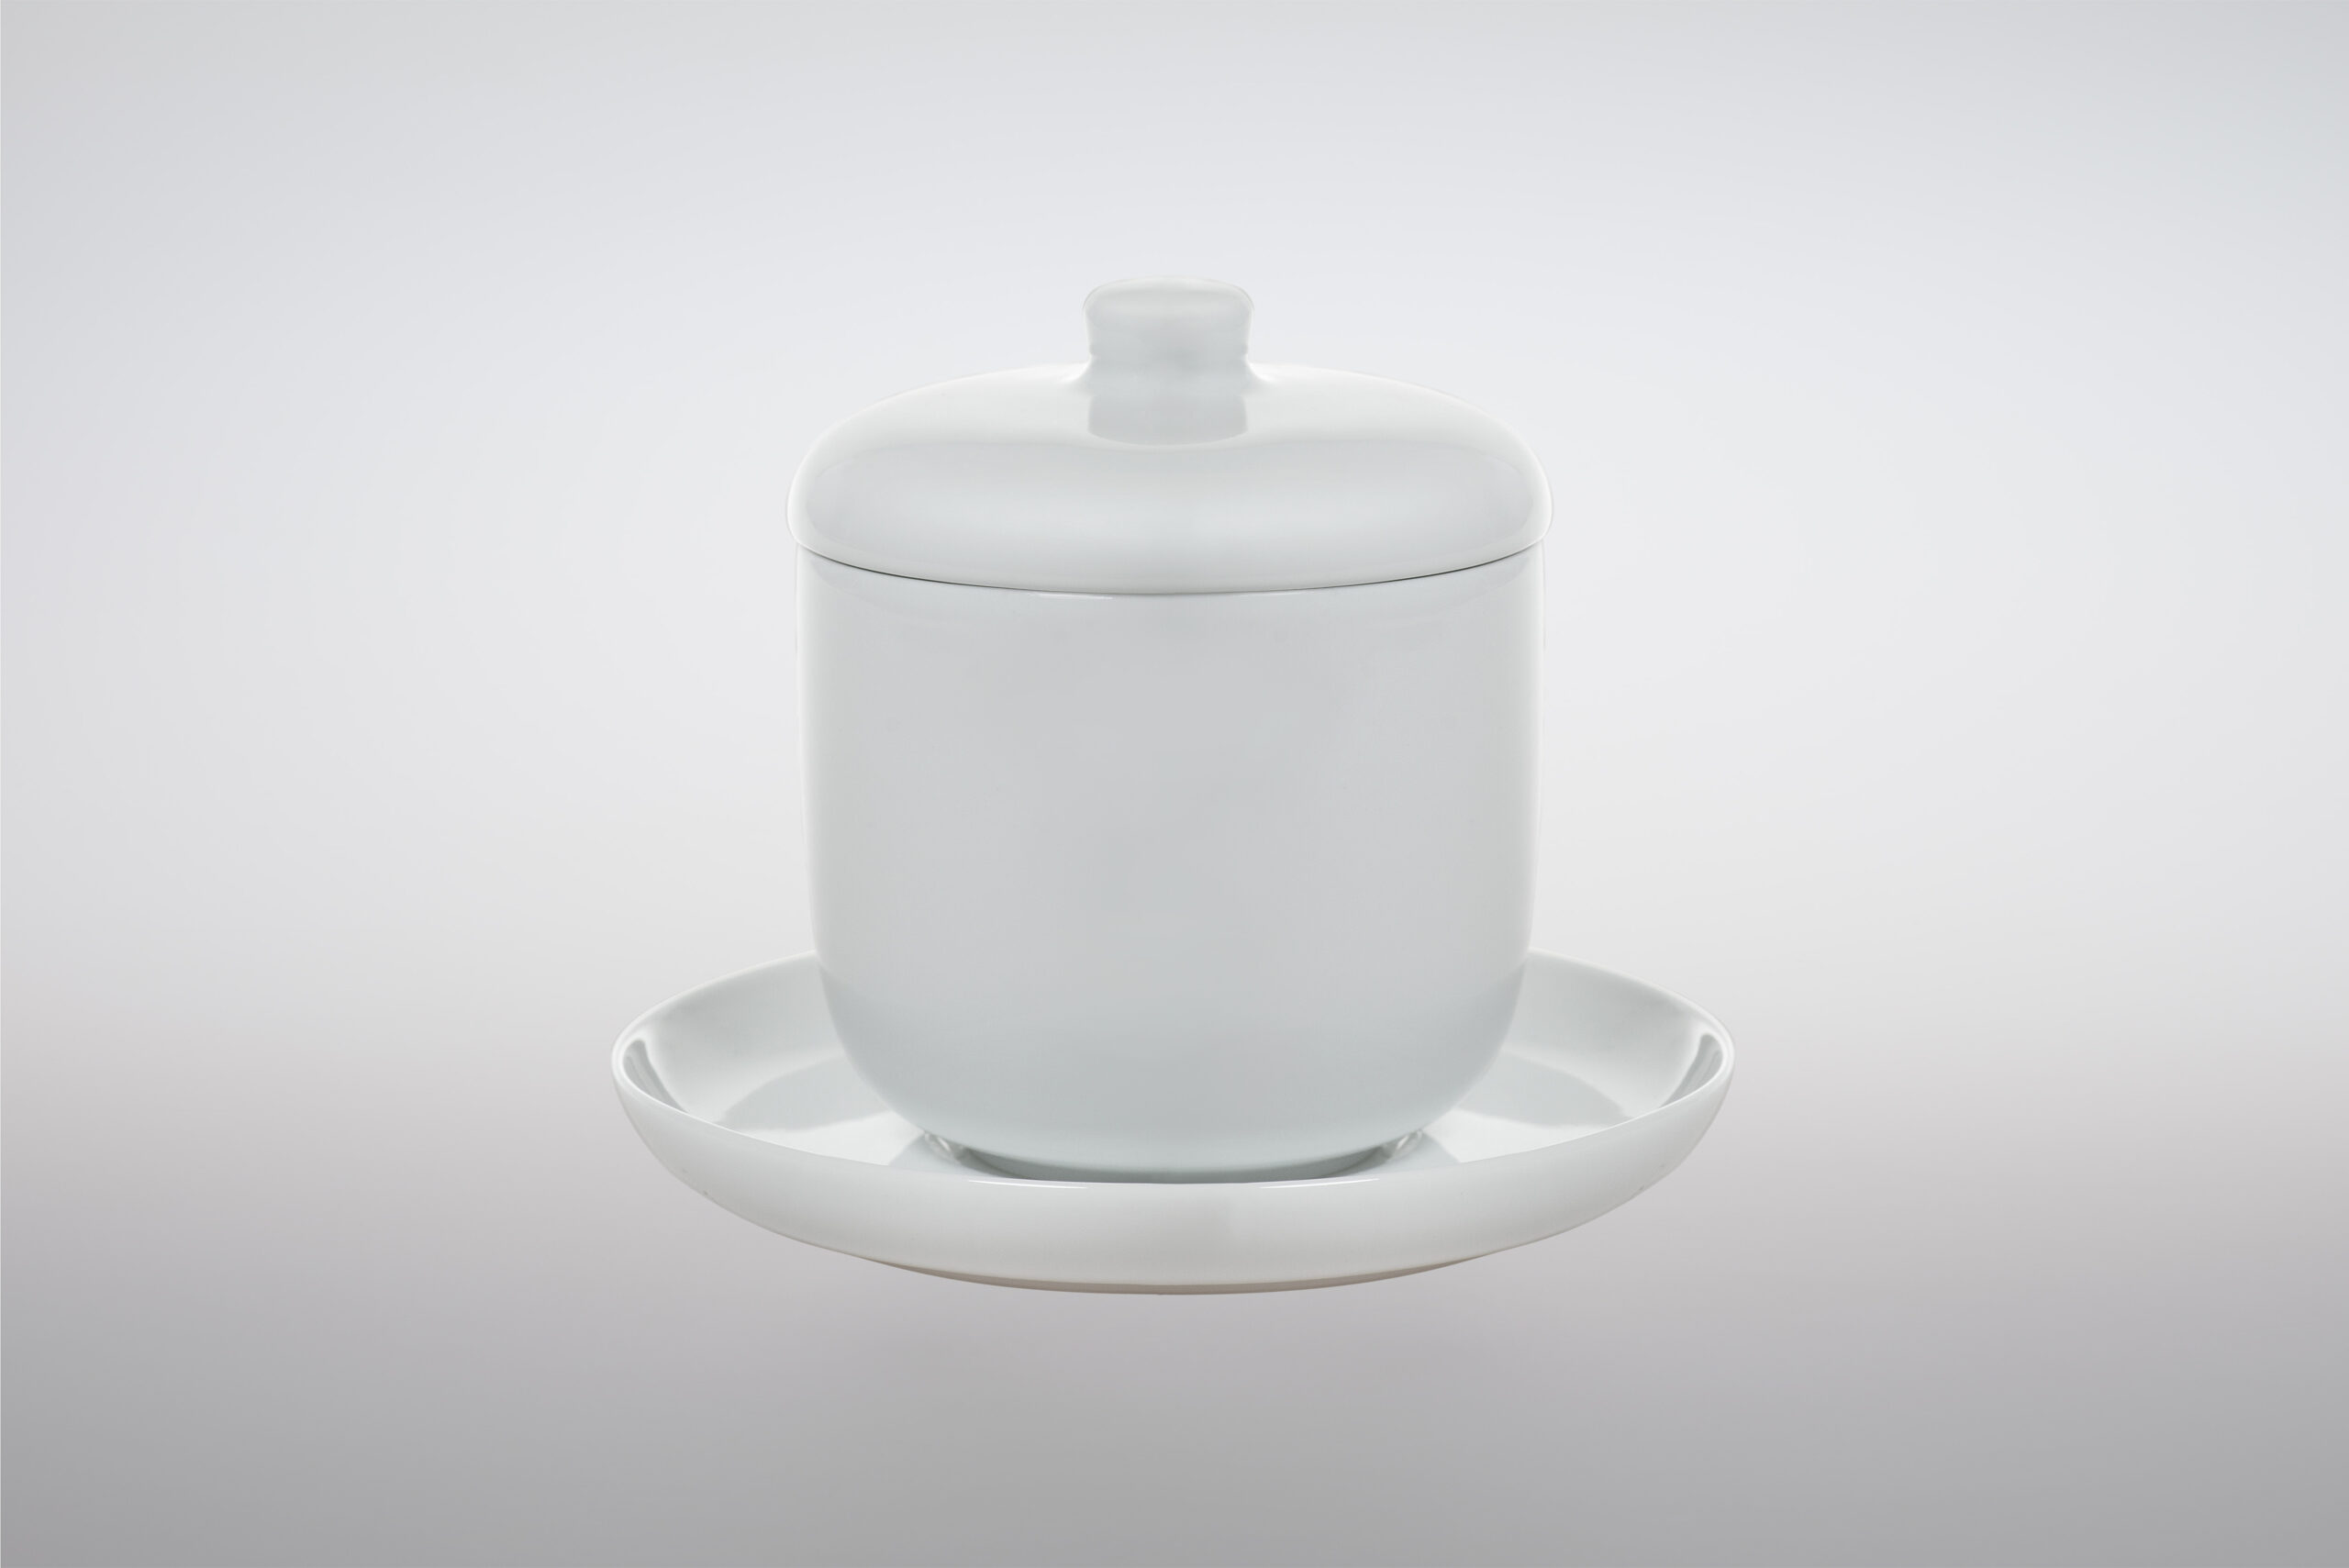 Chinese-style Porcelain Soup Tureen Set 300ml